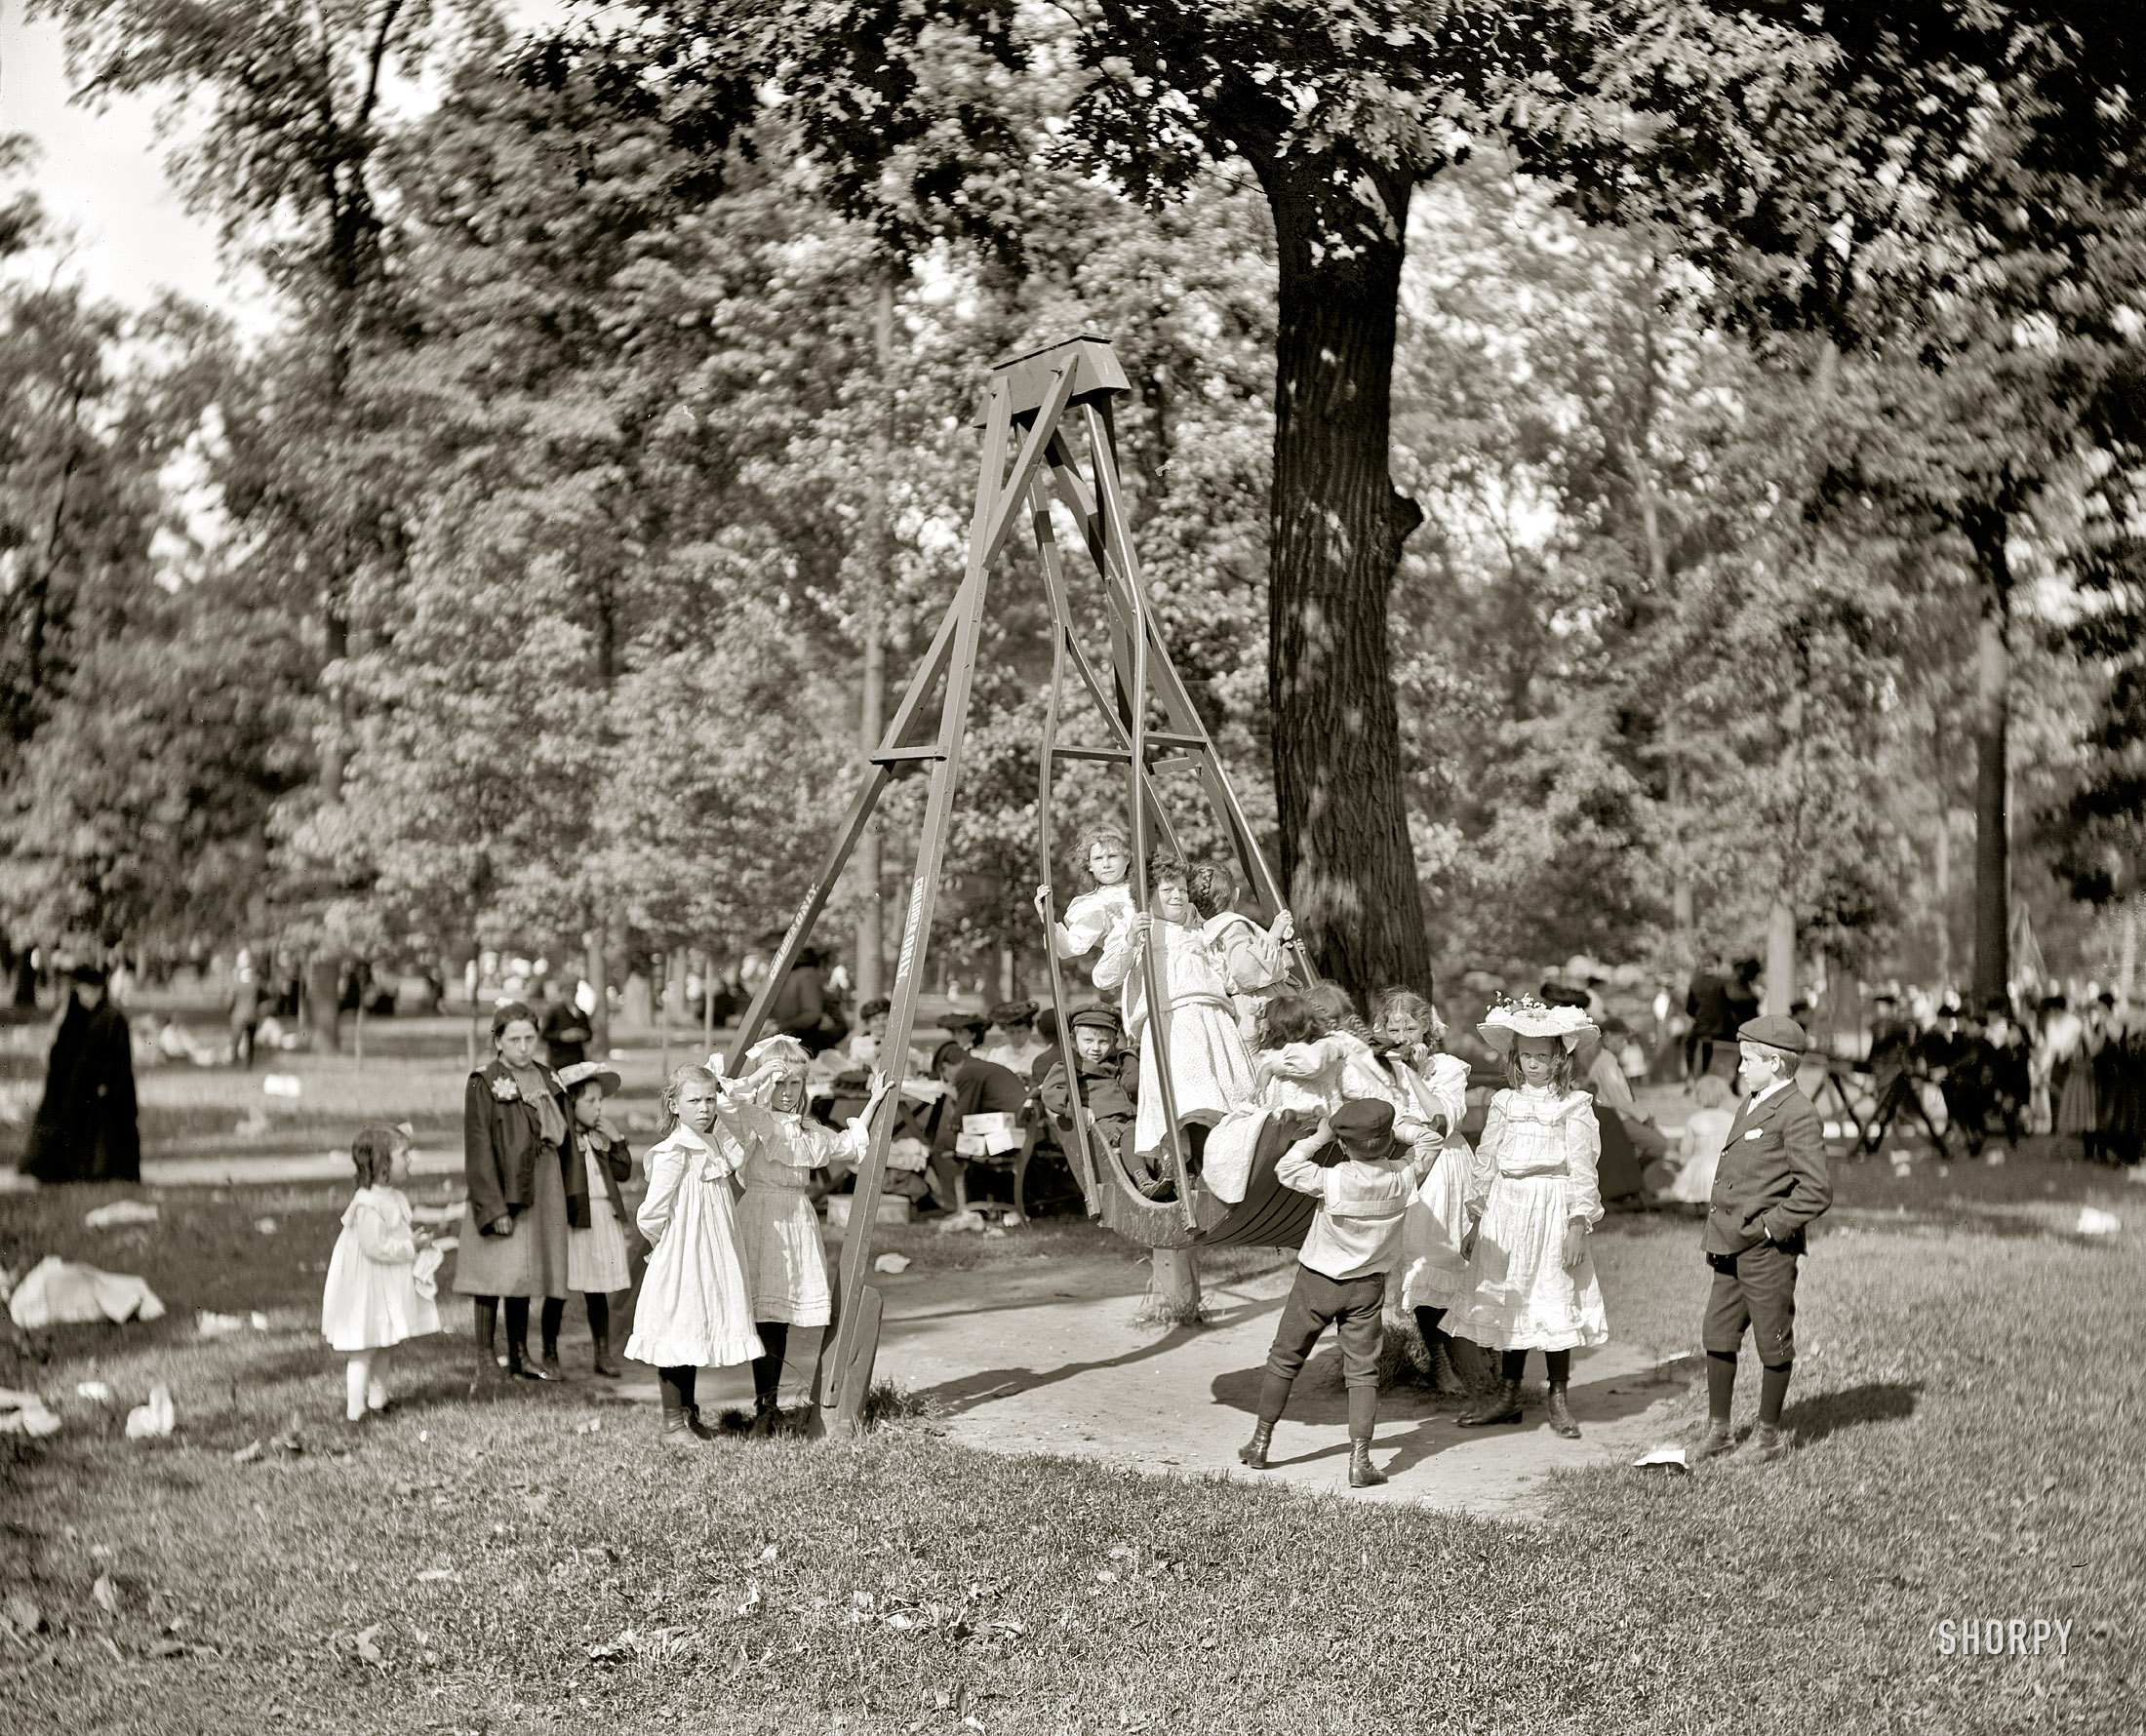 Detroit circa 1905. "Children's Day, Belle Isle Park." 8x10 inch dry plate glass negative, Detroit Publishing Company. View full size.